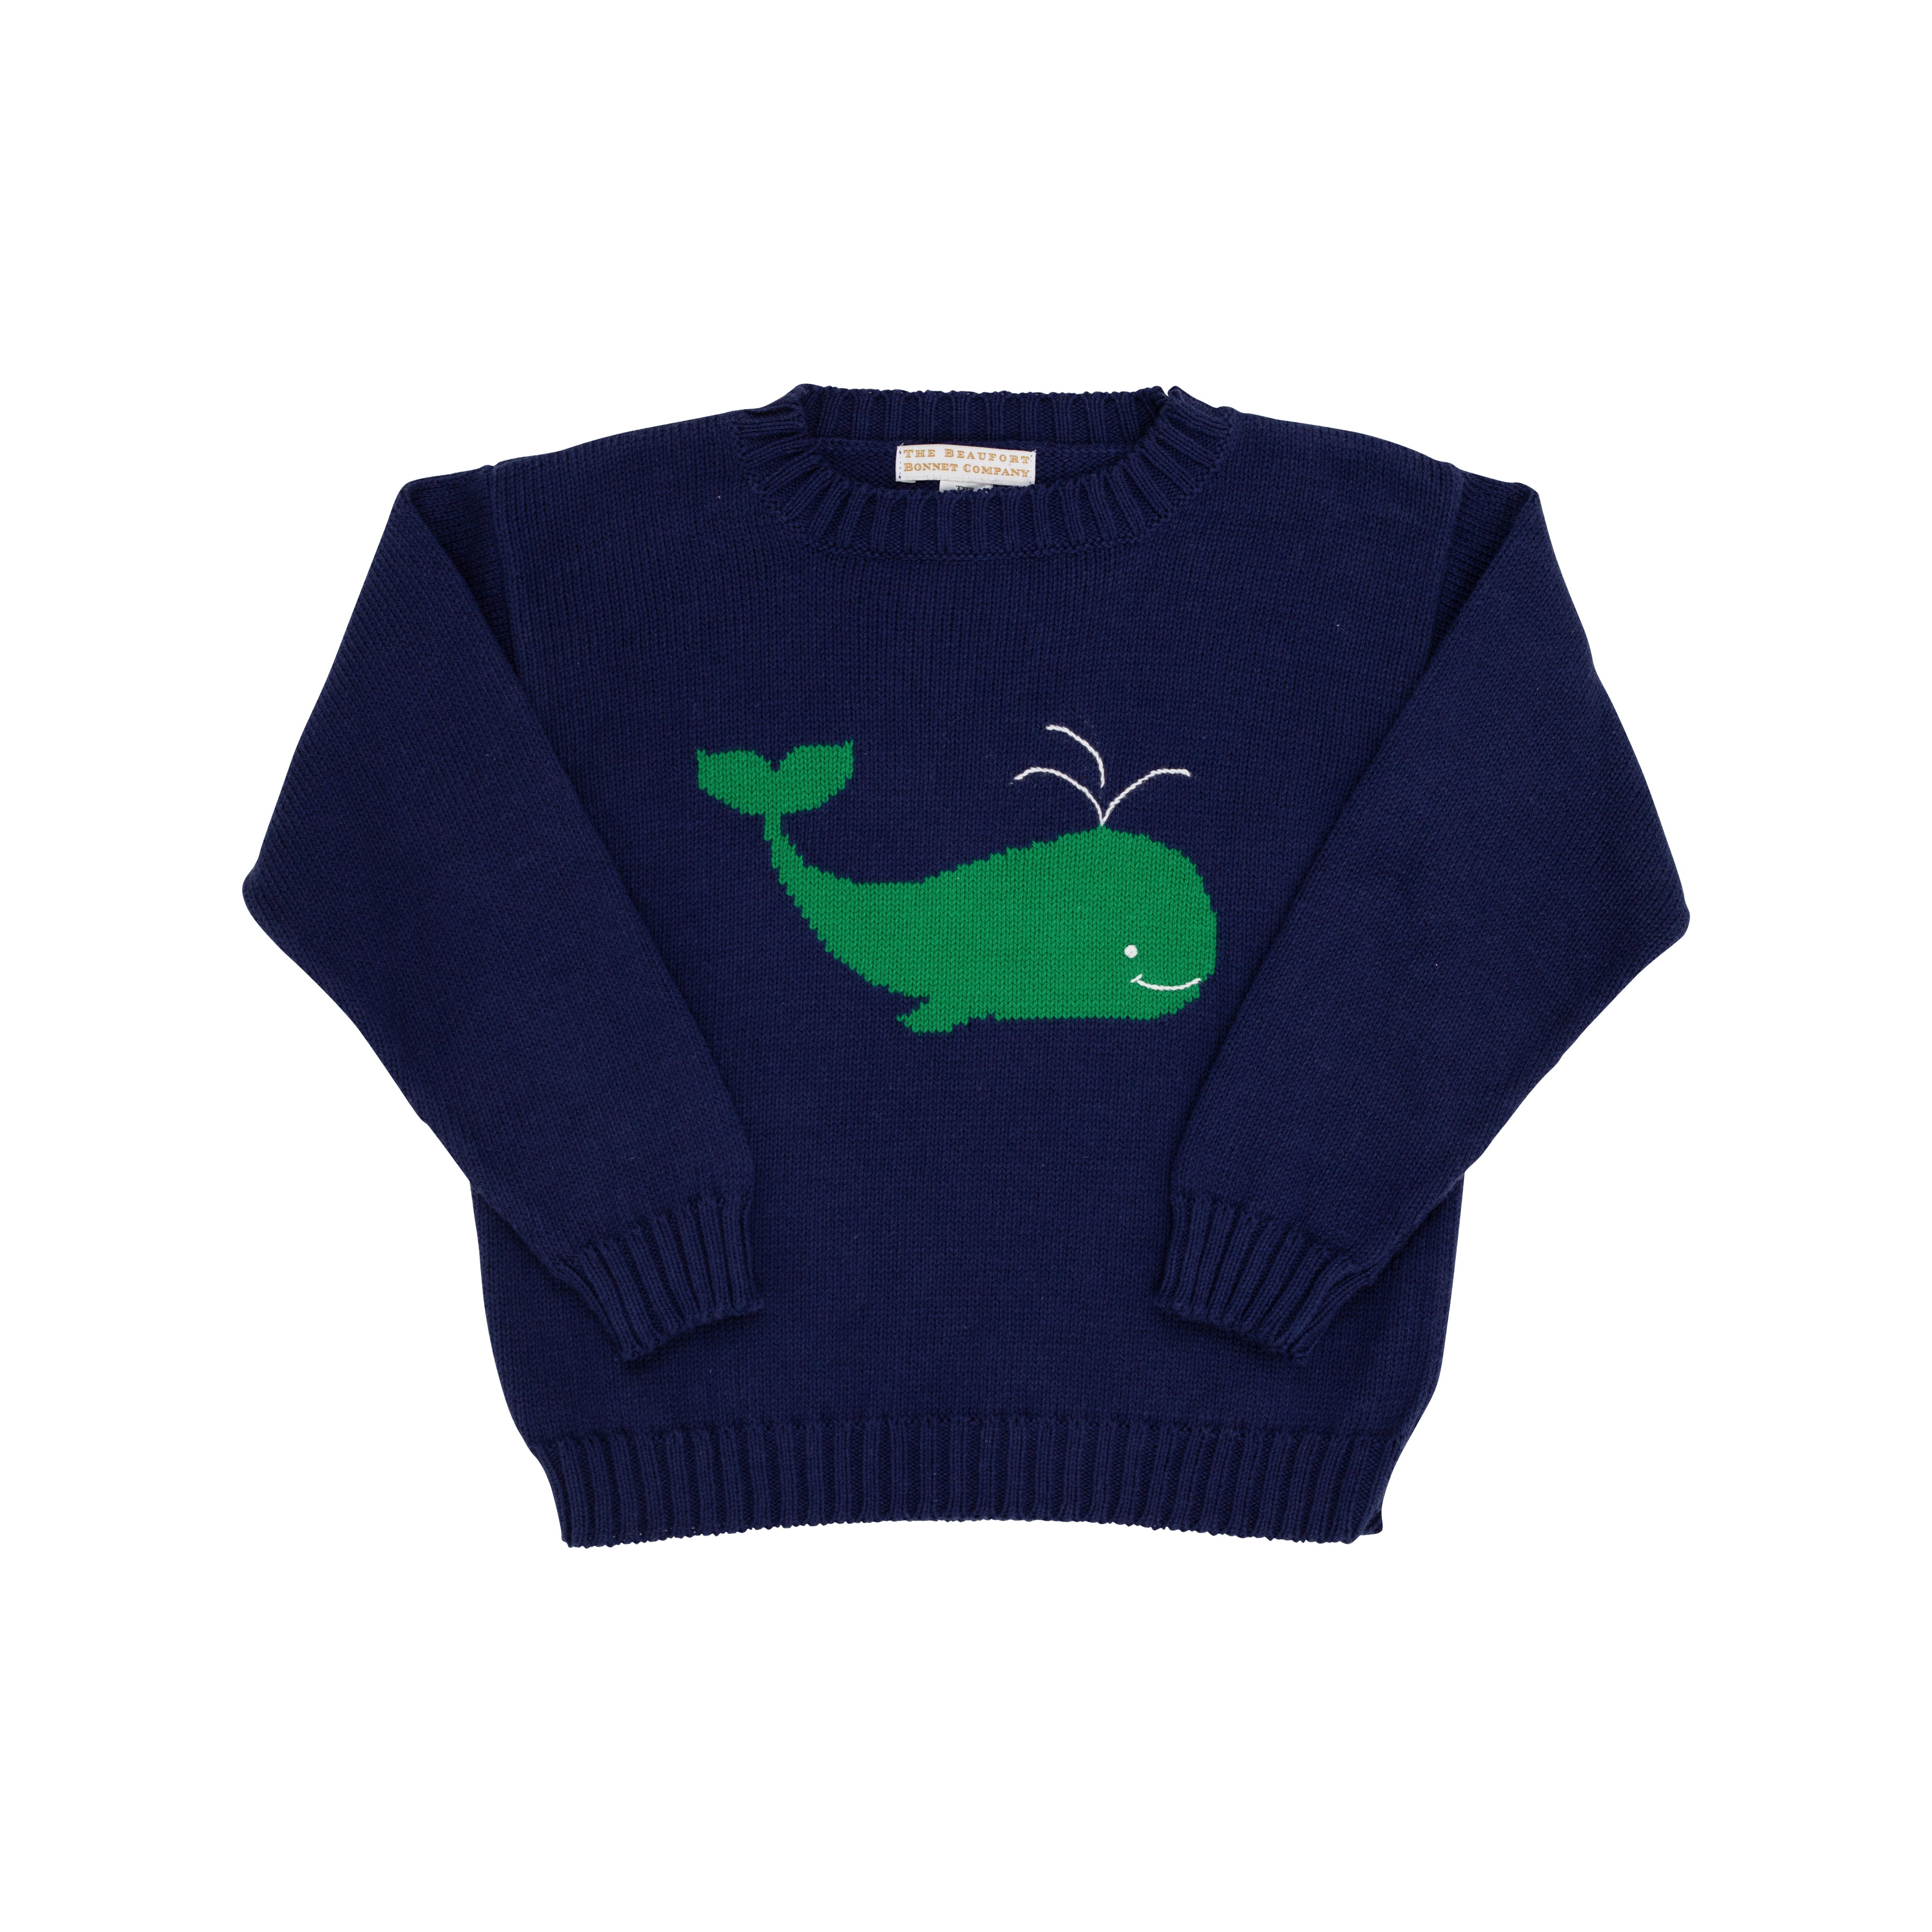 Isaac's Intarsia Sweater (Unisex) - Nantucket Navy with Whale Intarsia 8